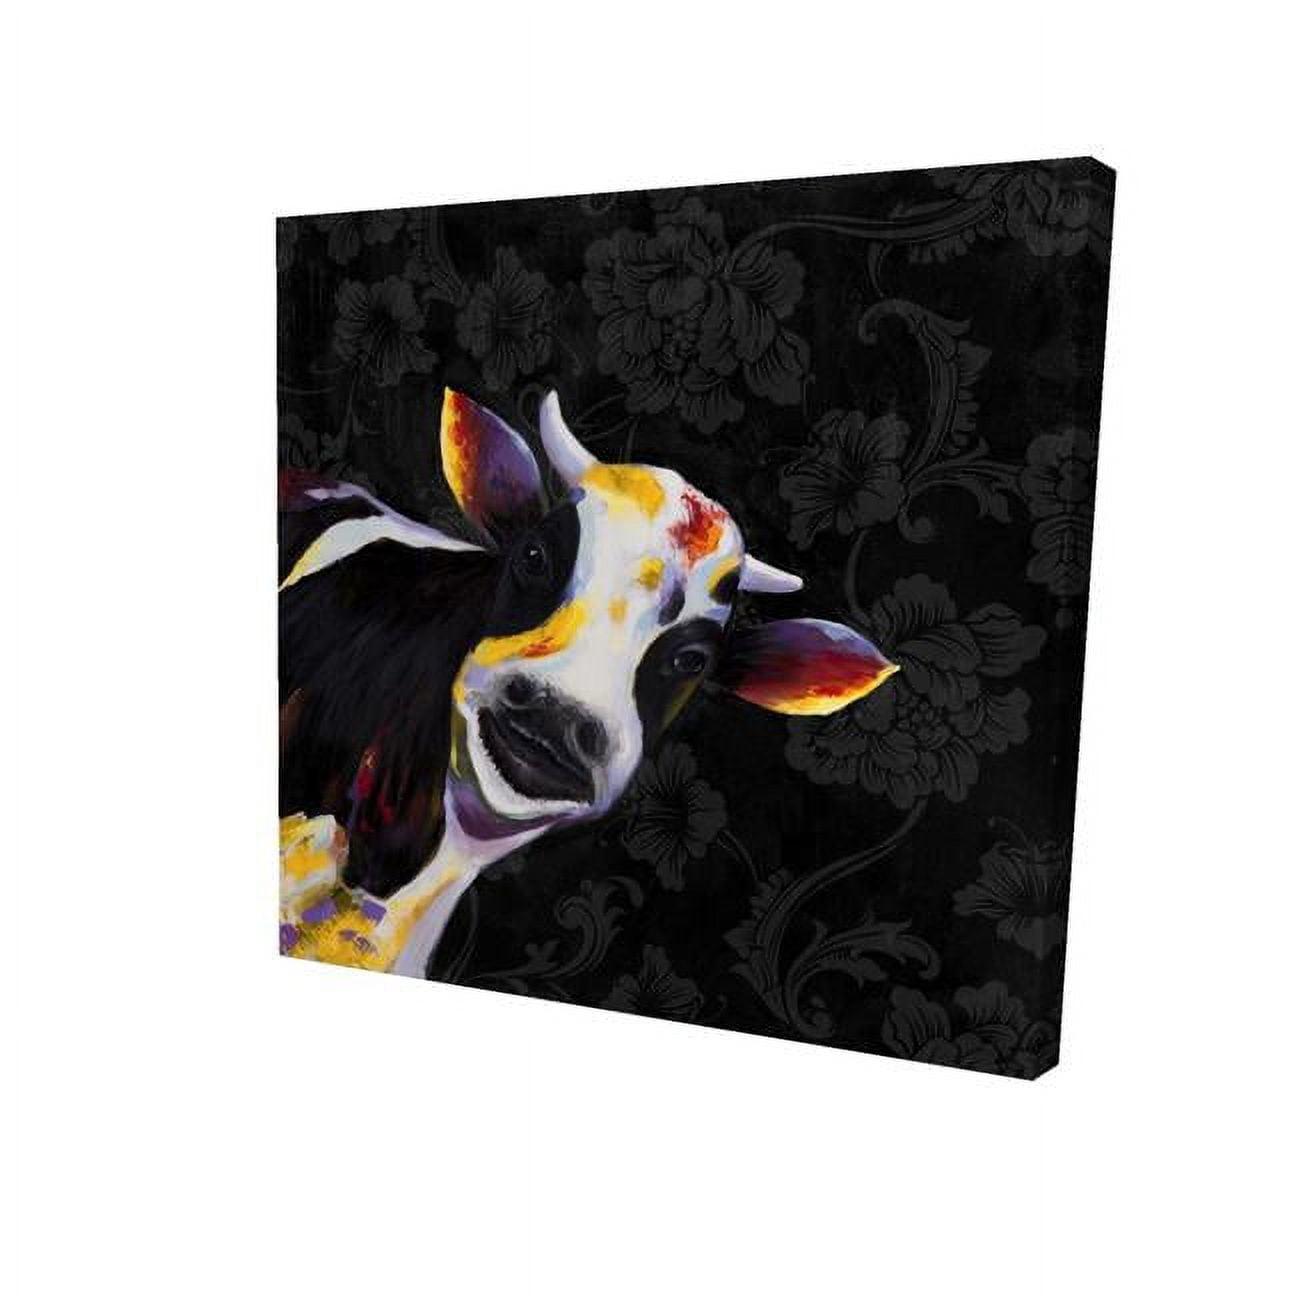 Begin Home Decor 2080-0808-AN119-1 8 x 8 in. Funny Cow-Print on Canvas